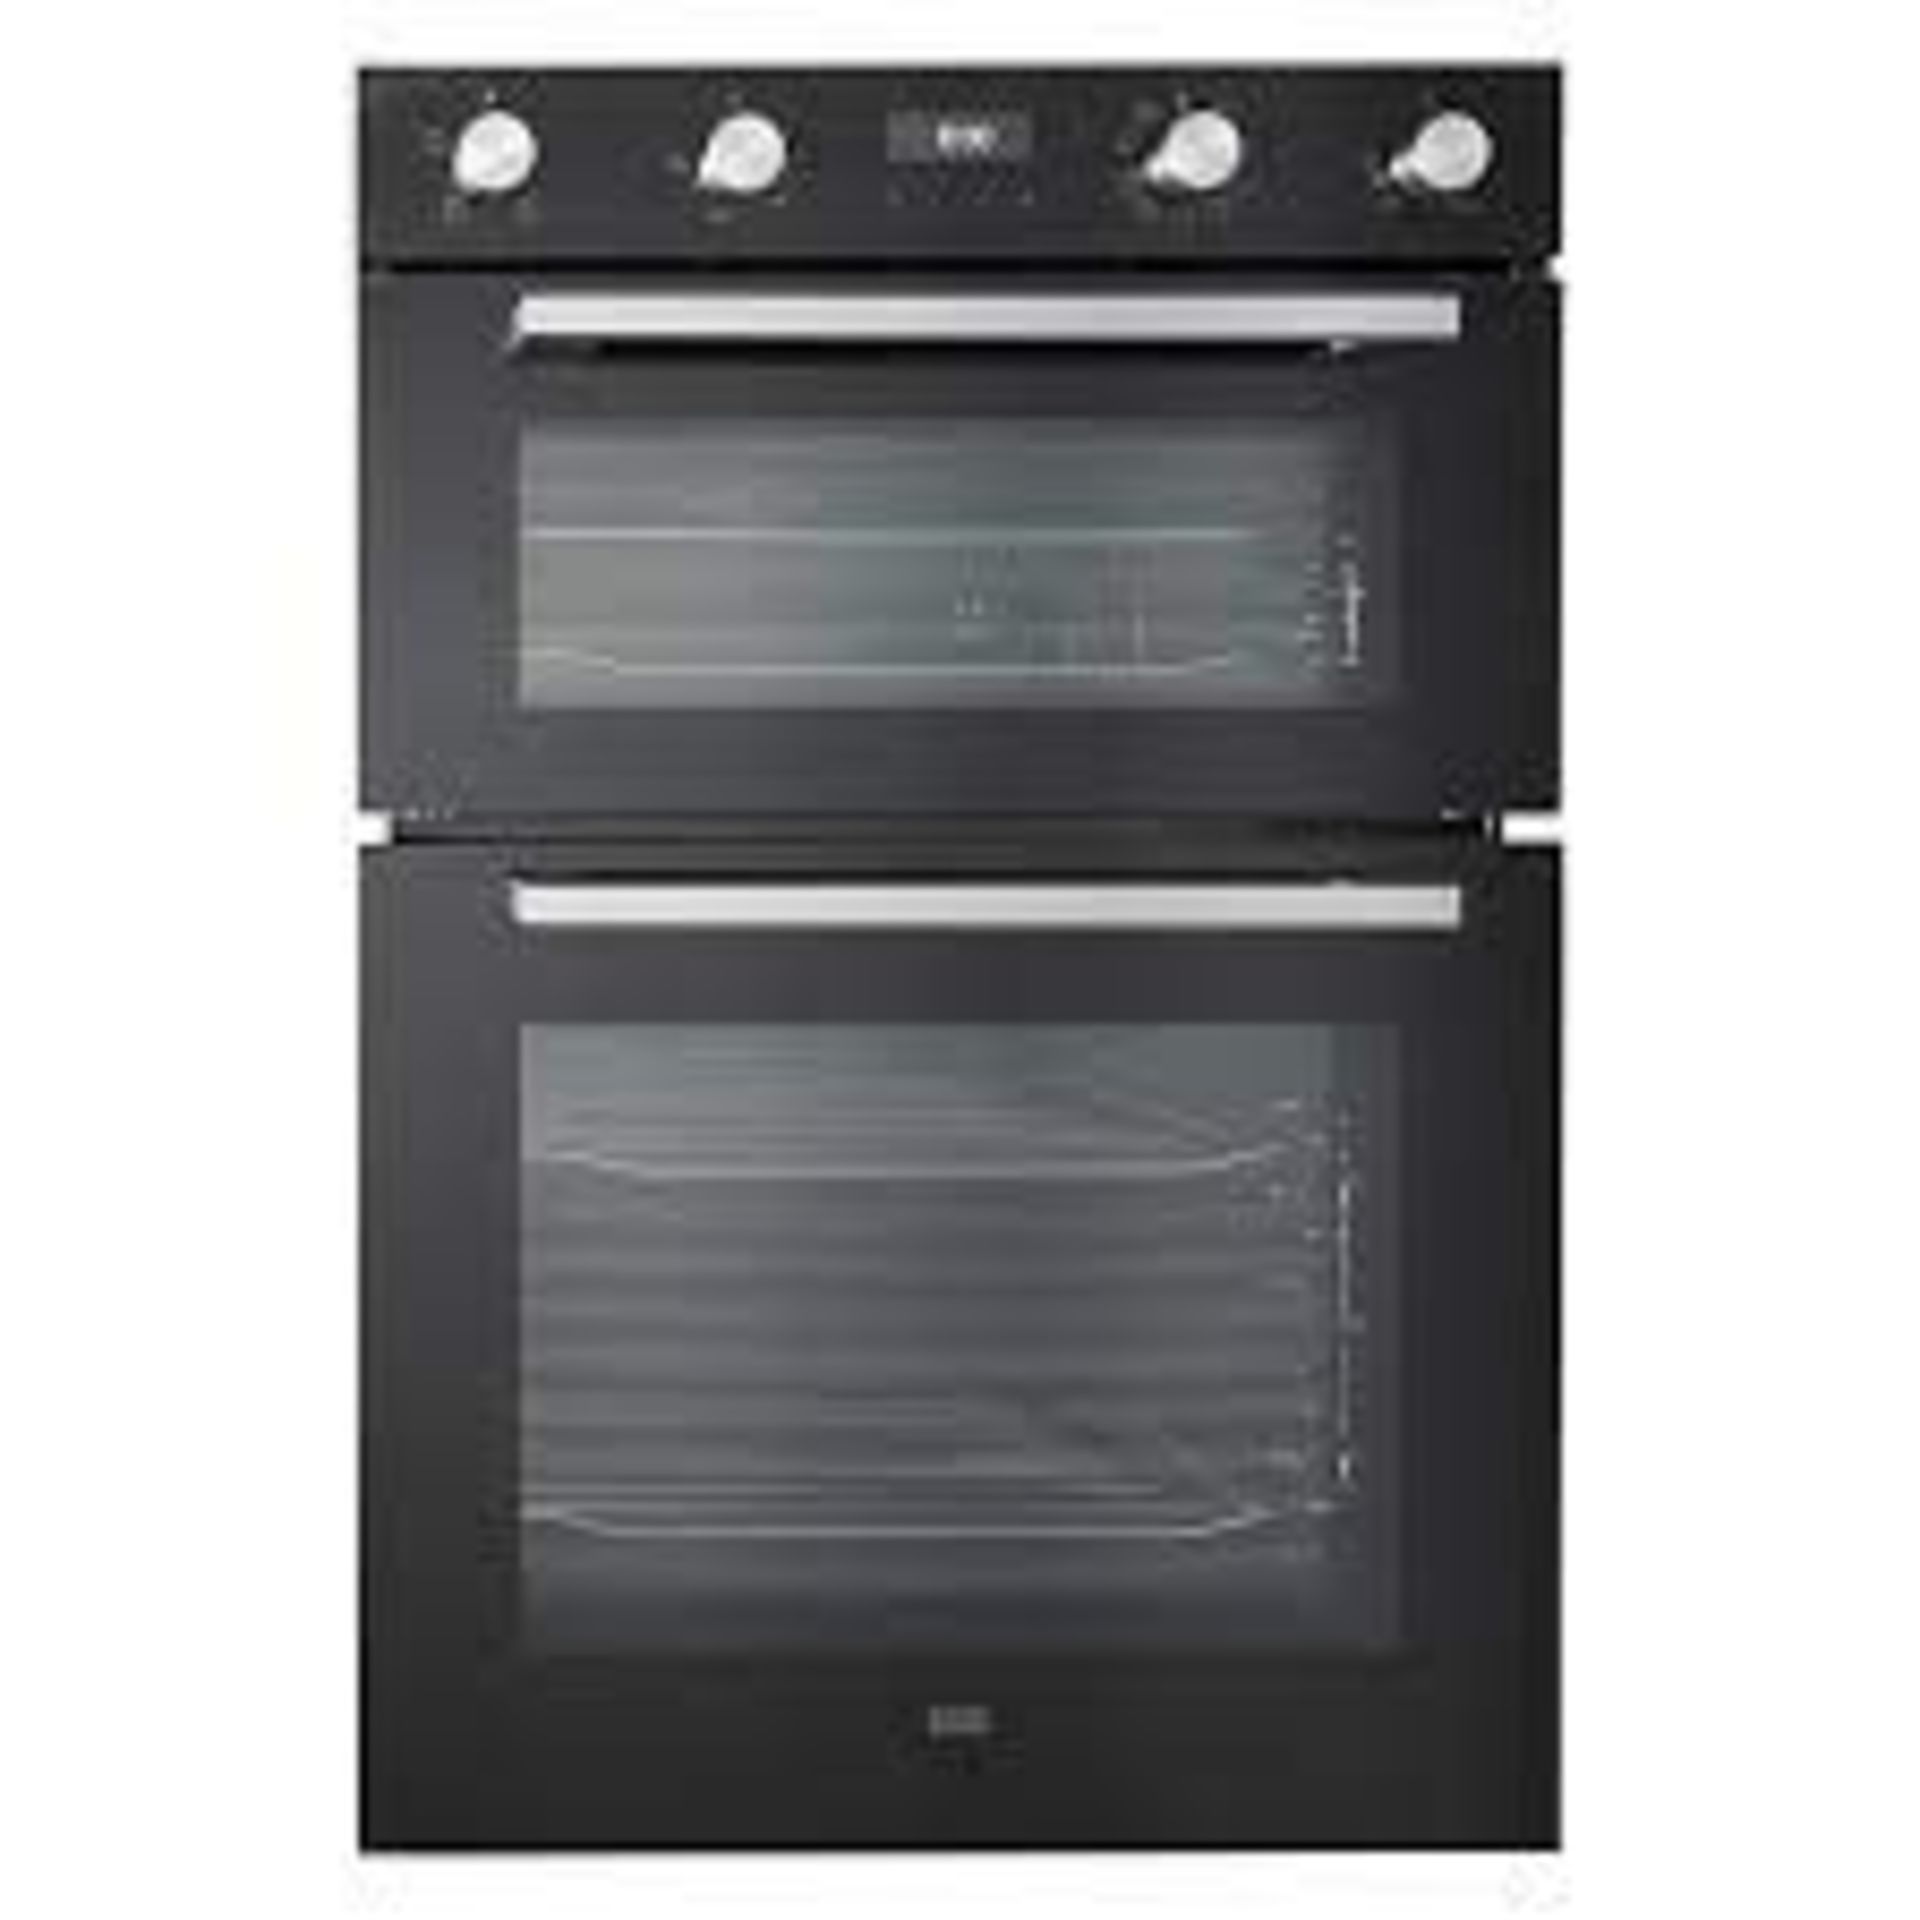 Cooke & Lewis CLELDO105 Built-in Double oven - Mirrored black. - SR4. Enjoy more room to cook with